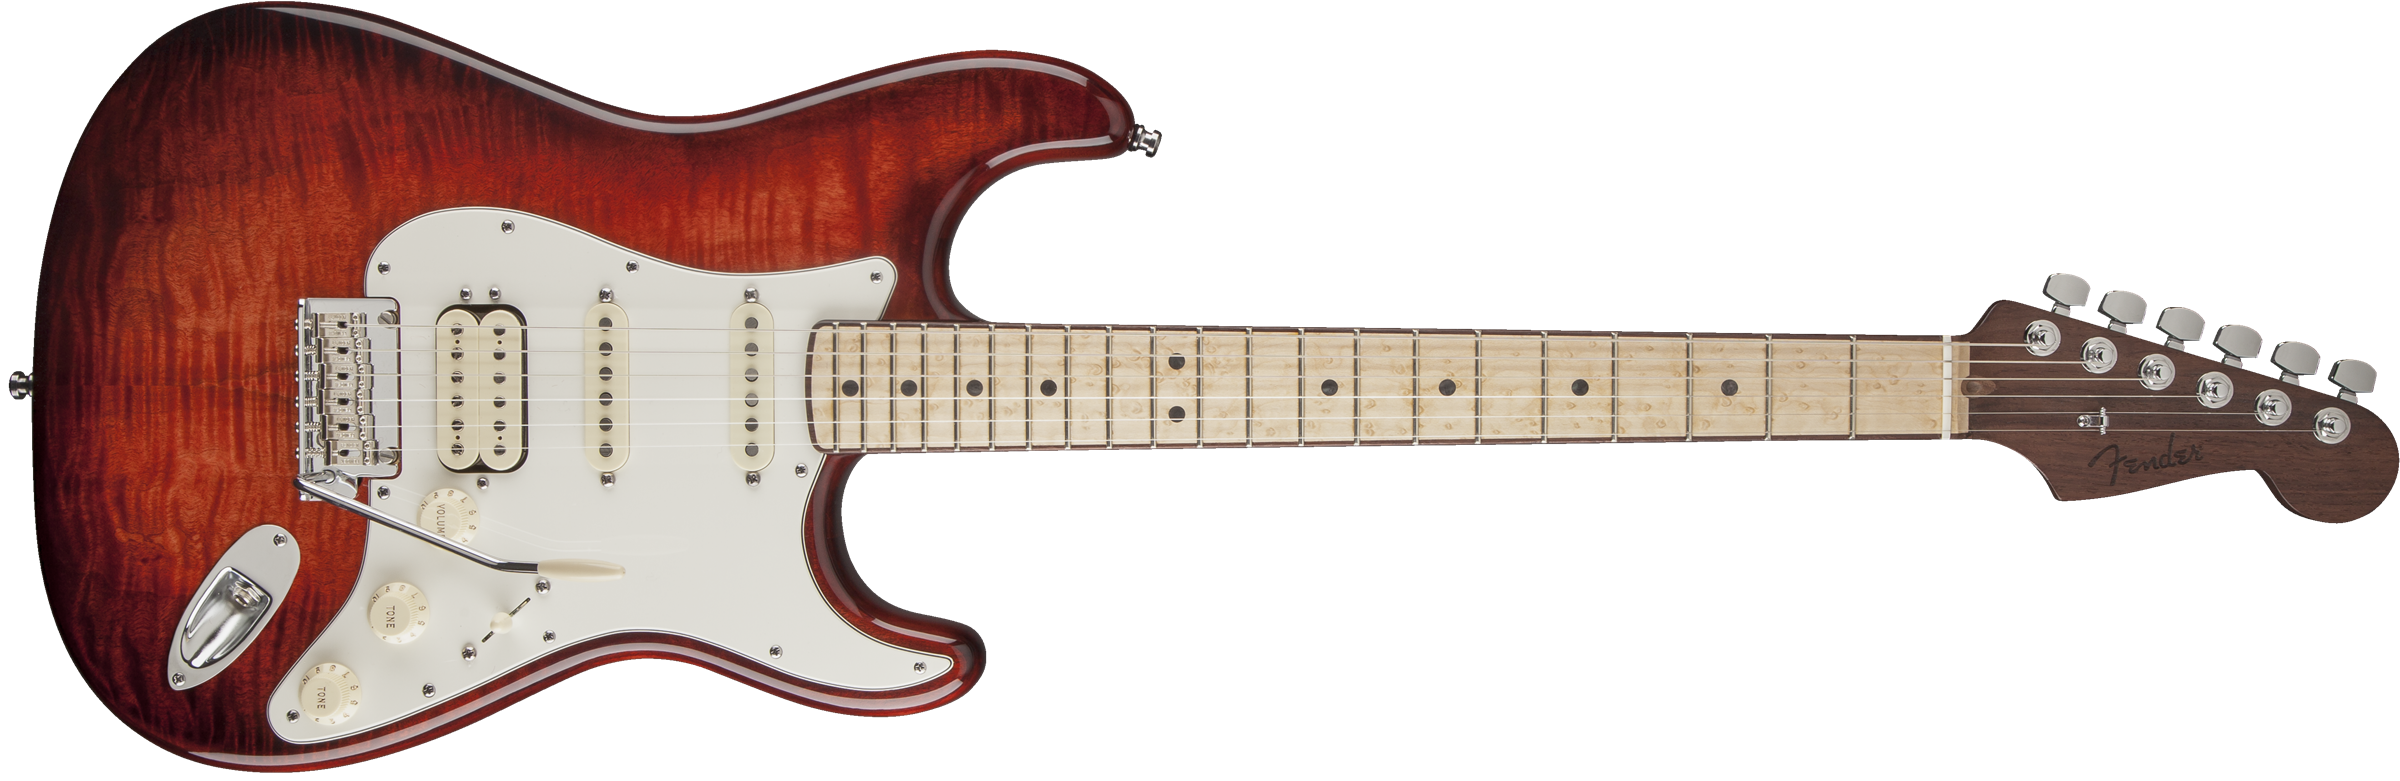 Fender Select Stratocaster® HSS Exotic Maple Flame, Channel-Bound Maple Fingerboard, Bing Cherry Burst